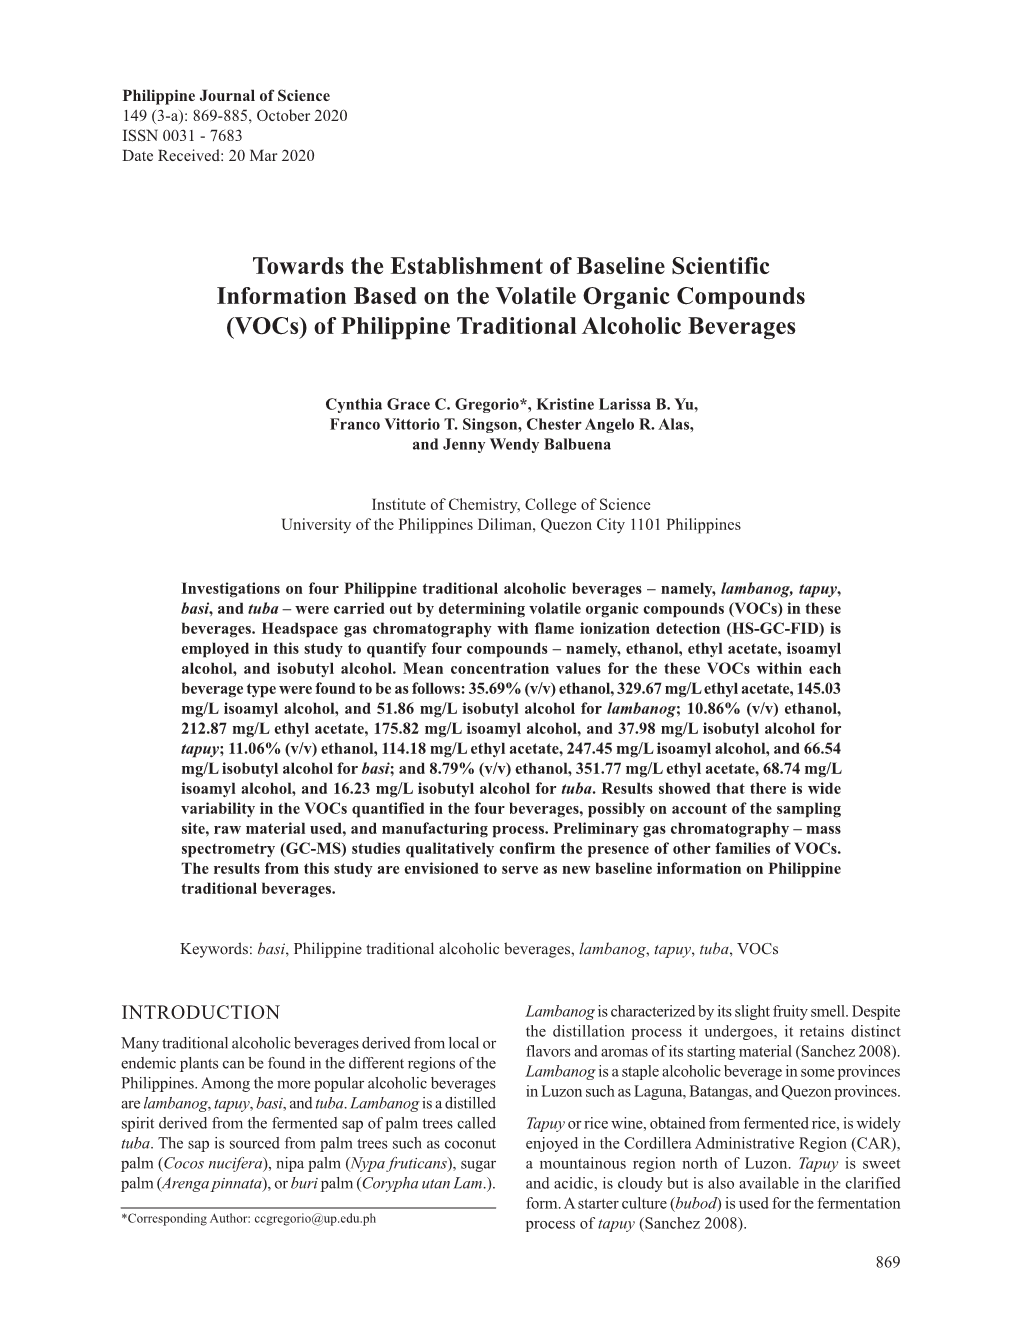 Towards the Establishment of Baseline Scientific Information Based on the Volatile Organic Compounds (Vocs) of Philippine Traditional Alcoholic Beverages